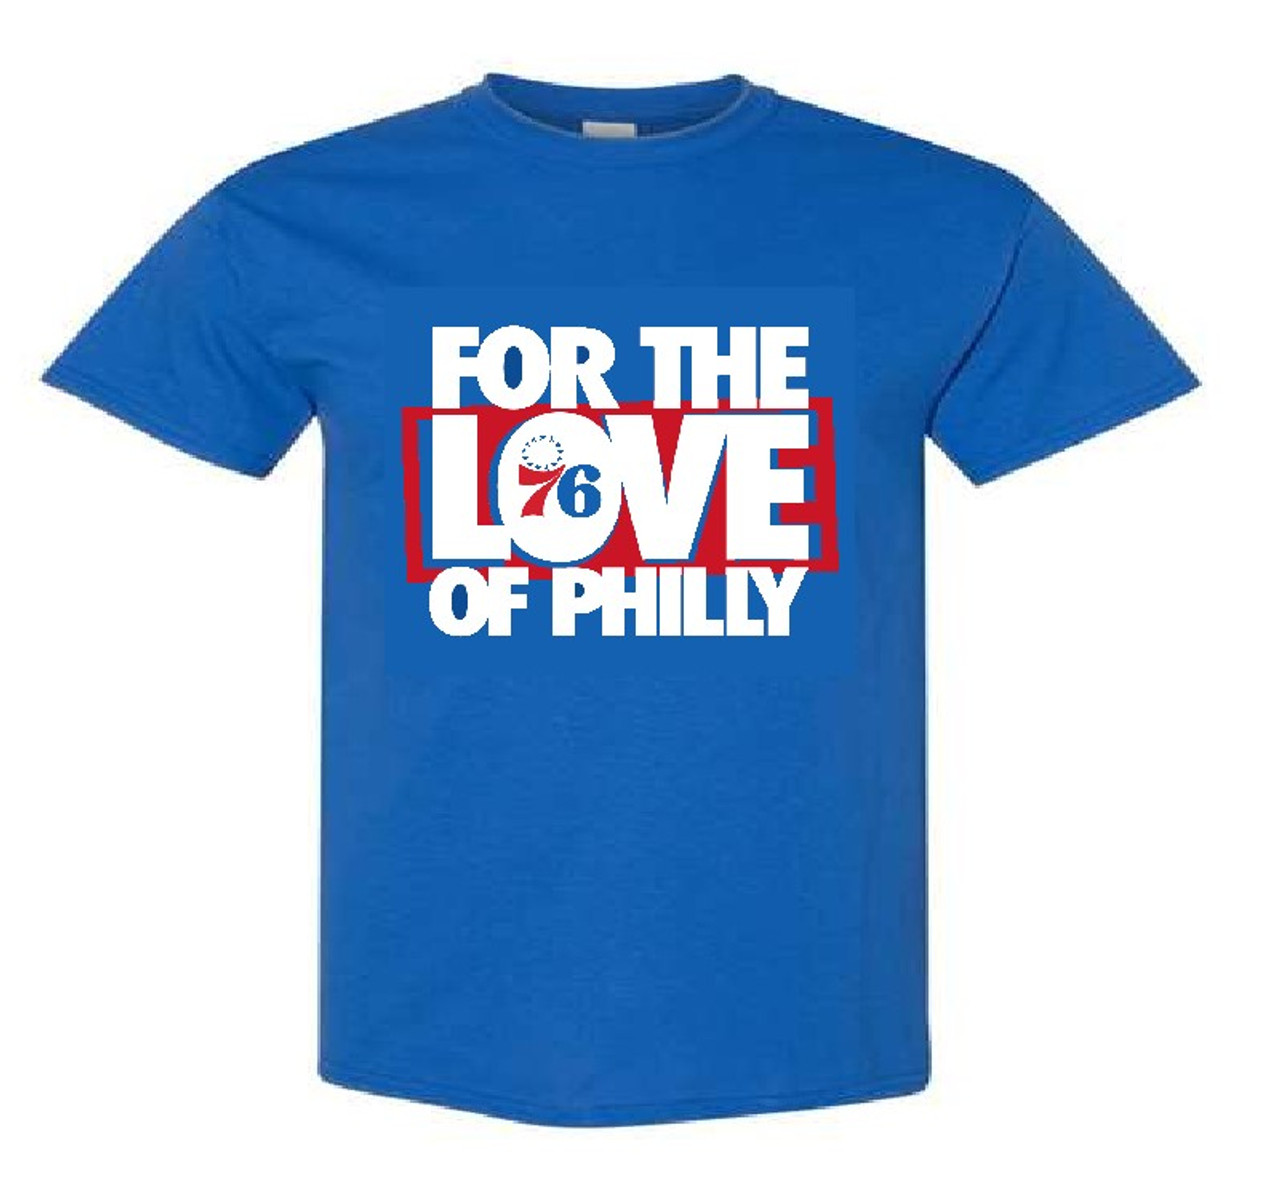 Get ready for the NBA Playoffs with new Philadelphia 76ers merchandise